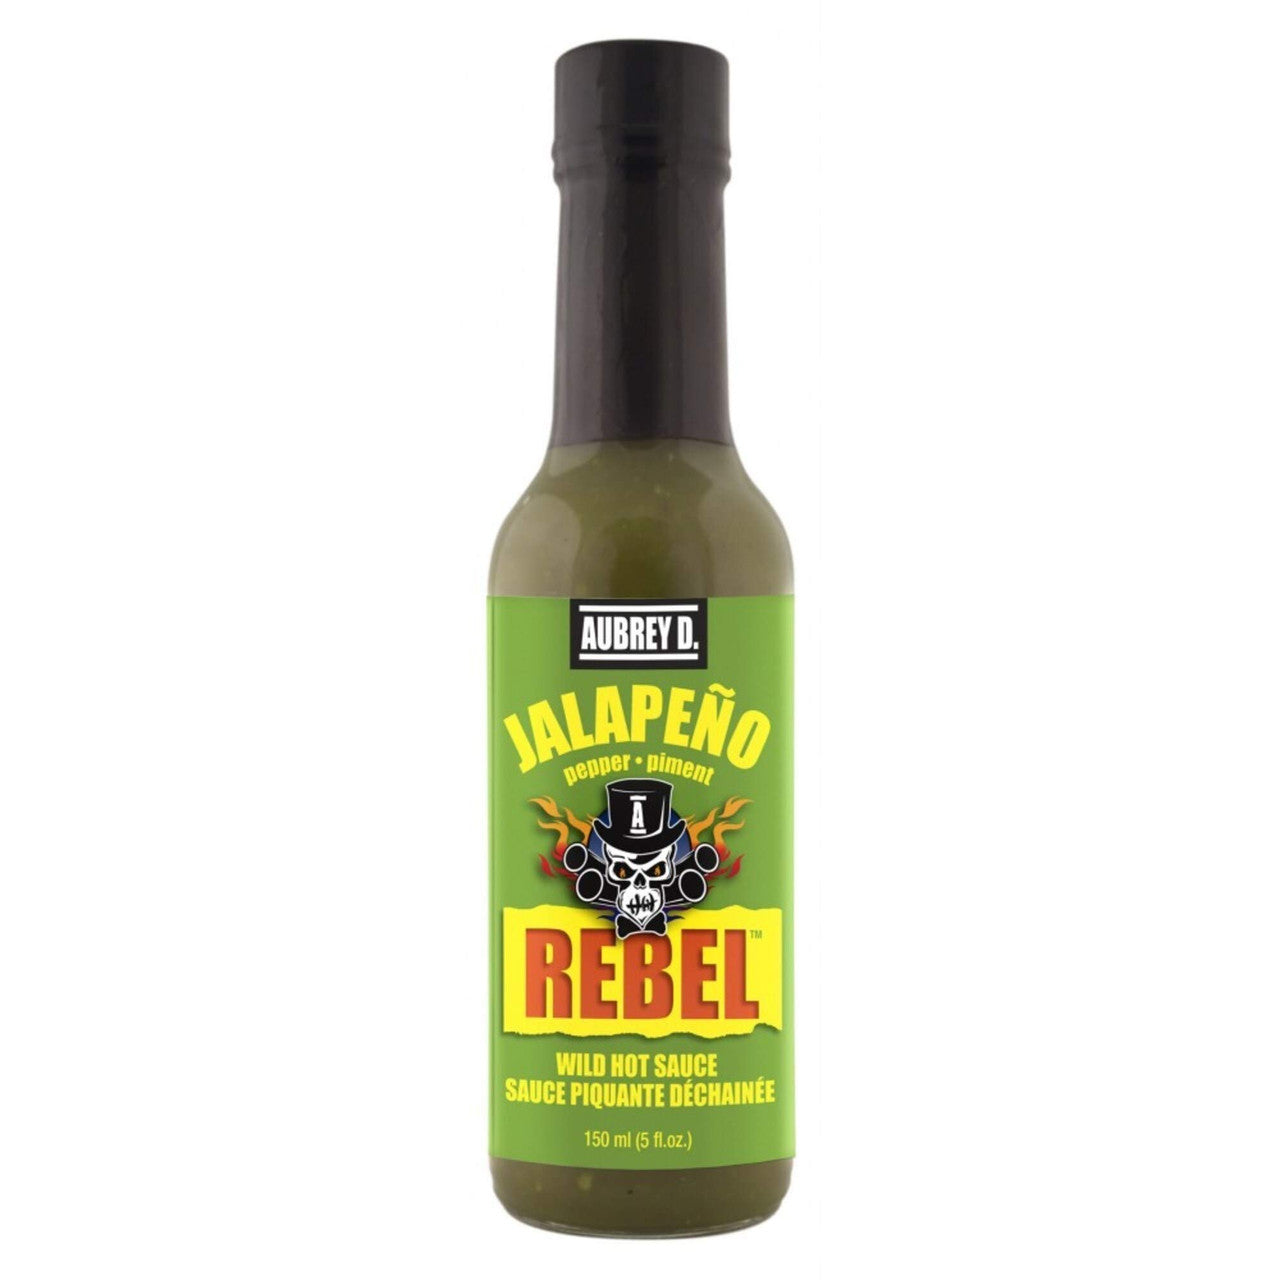 Aubrey D. Jalapeno Hot Sauce, 150ml/5.1 fl. oz., {Imported from Canada}